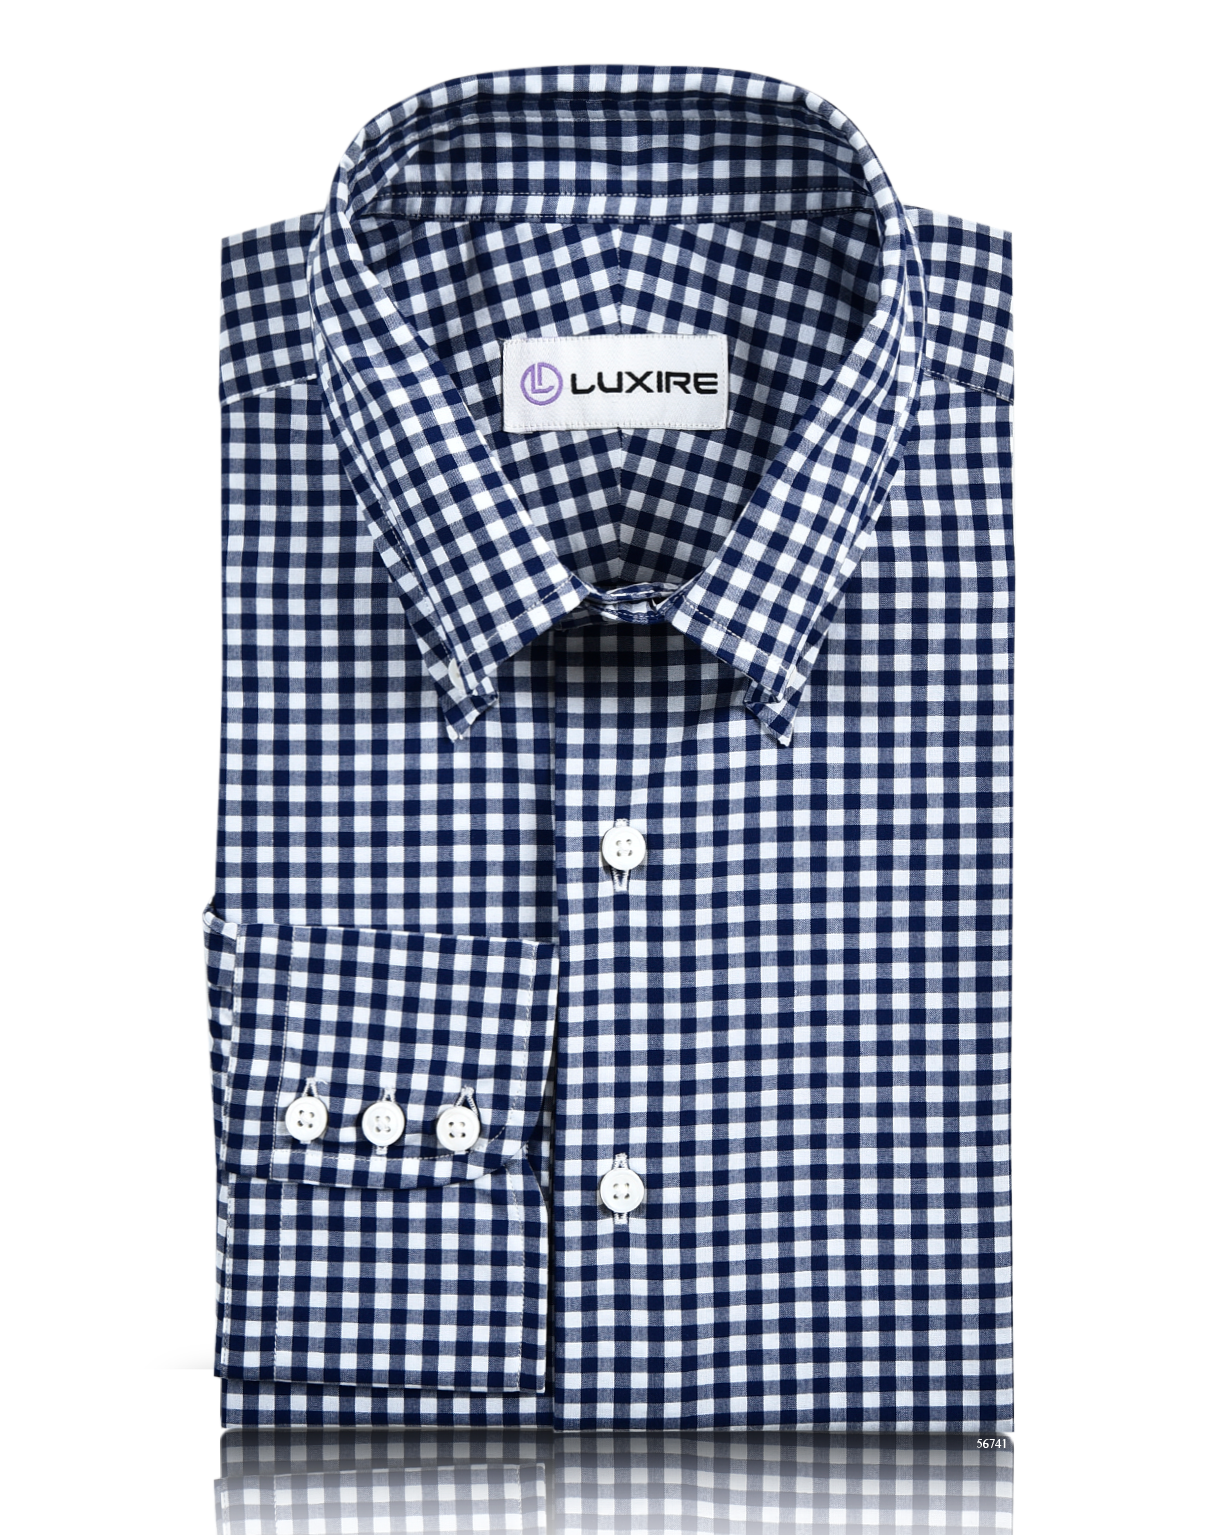 Close up view of custom check shirts for men by Luxire in navy sky tattersall